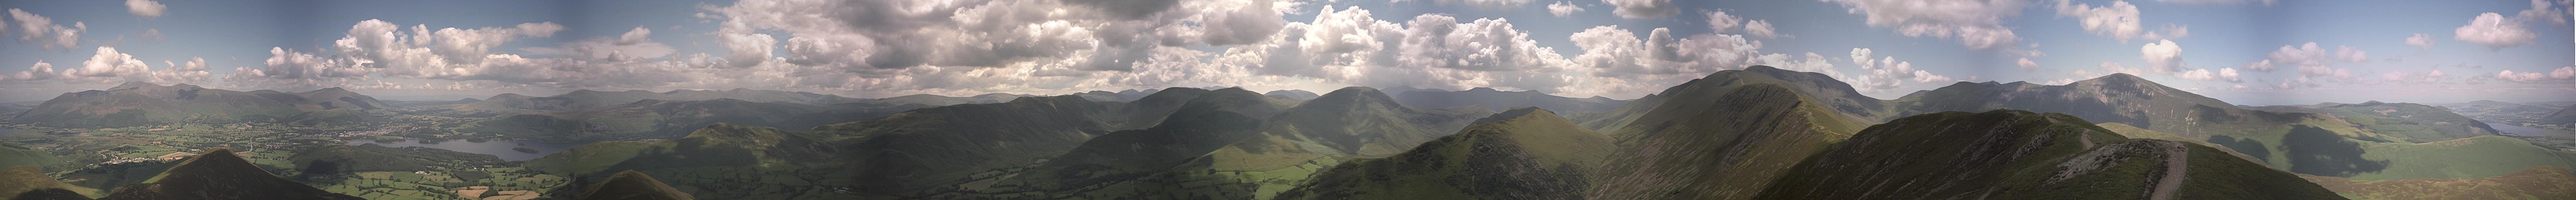 Causey Pike - Complete Panorama